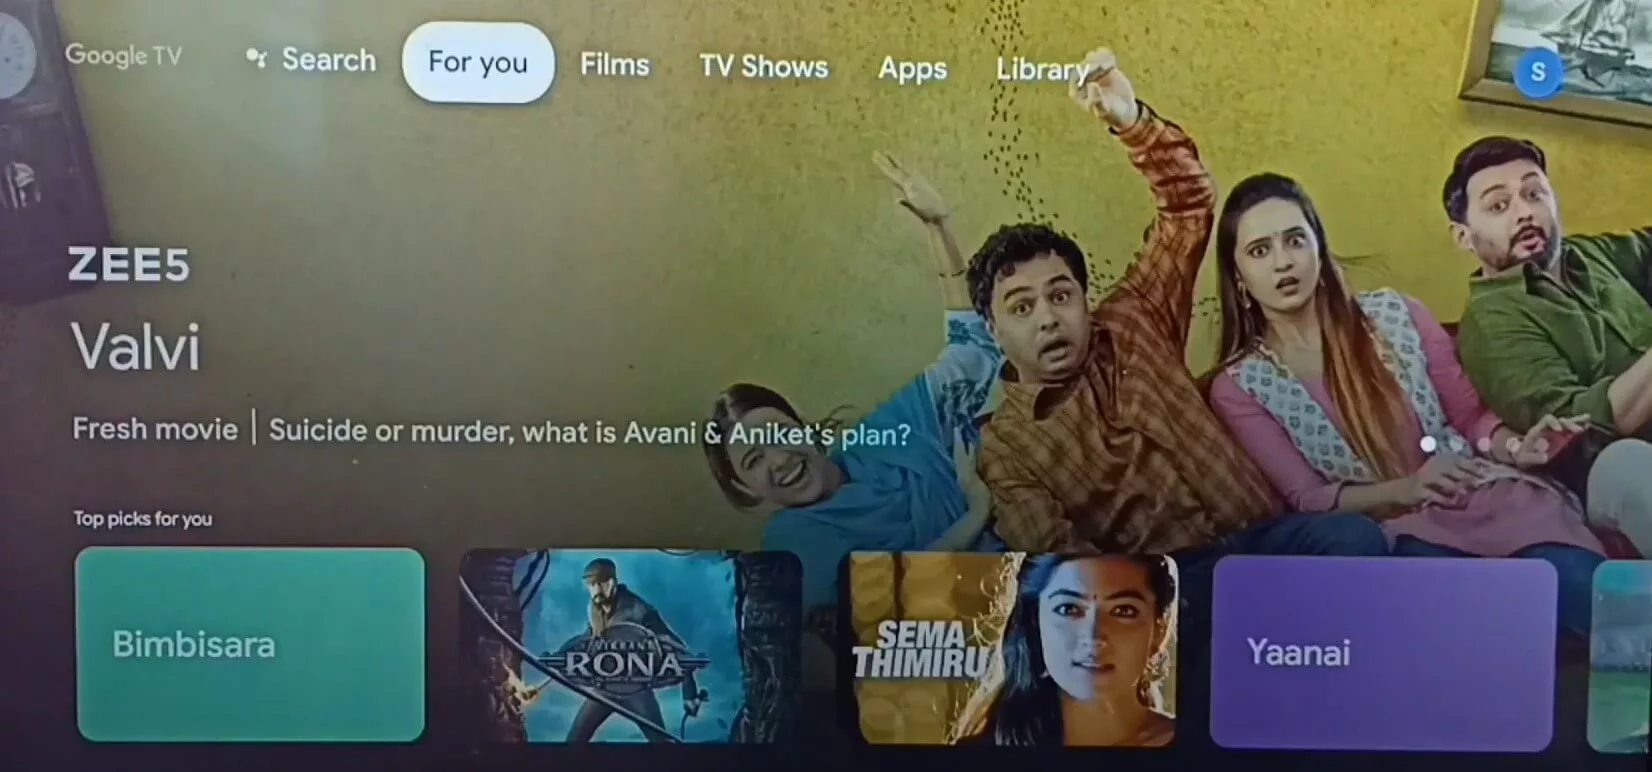 How to Get Netflix on Google TV?